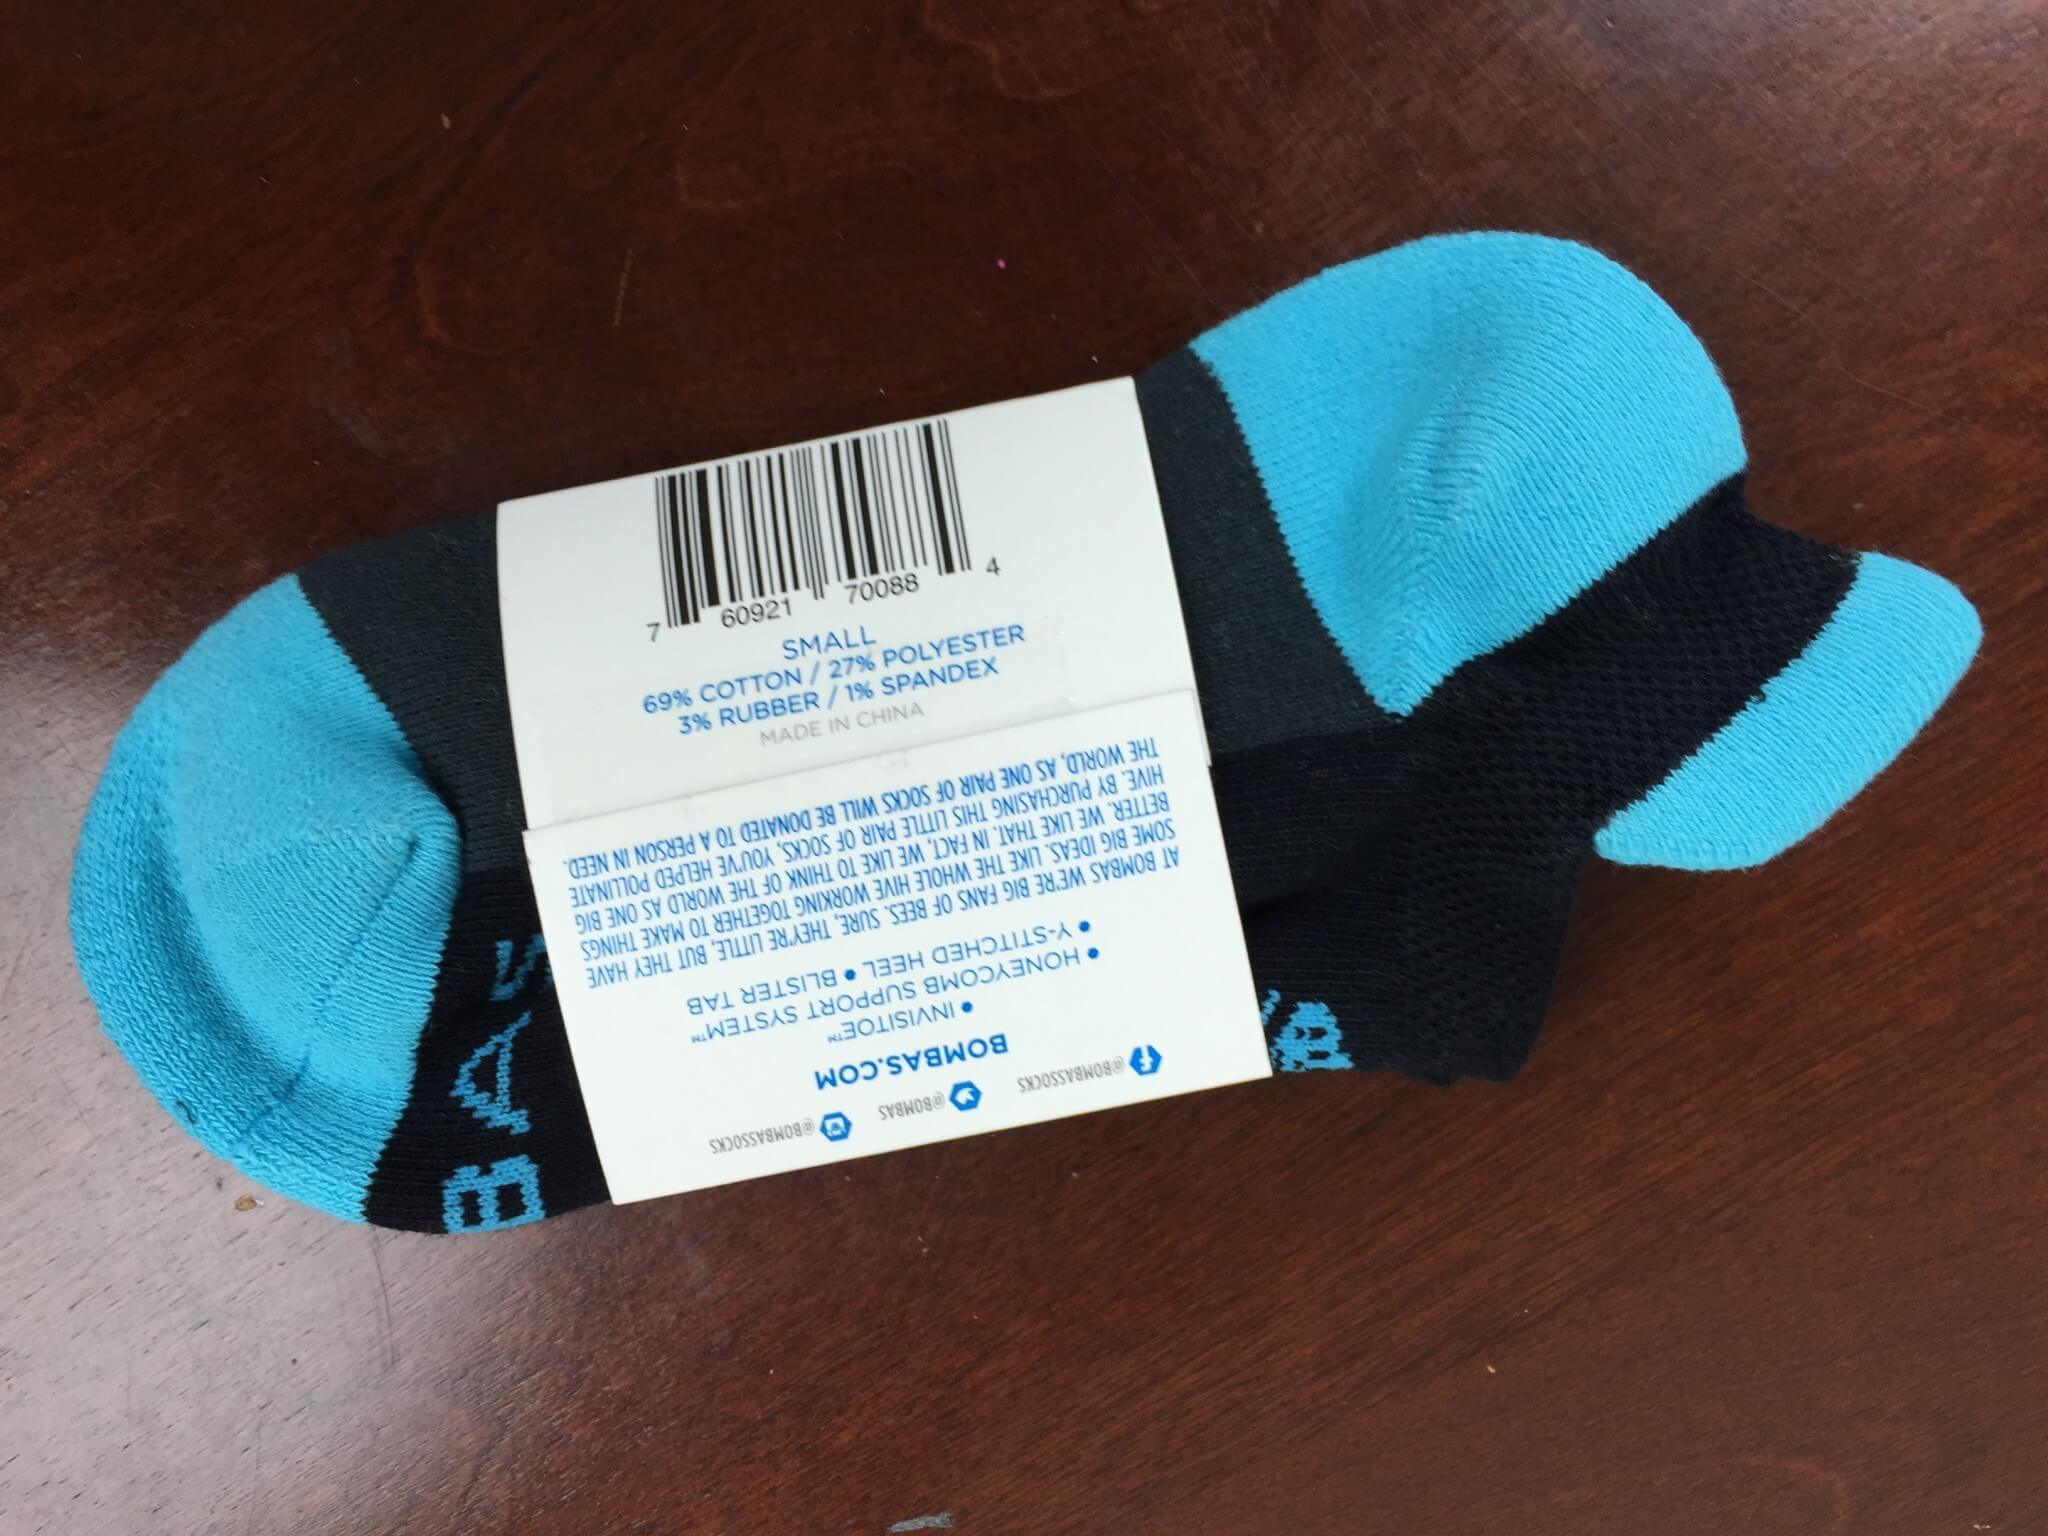 Bombas Socks Review: The Socks I Wish Had a Subscription, But Don't ...